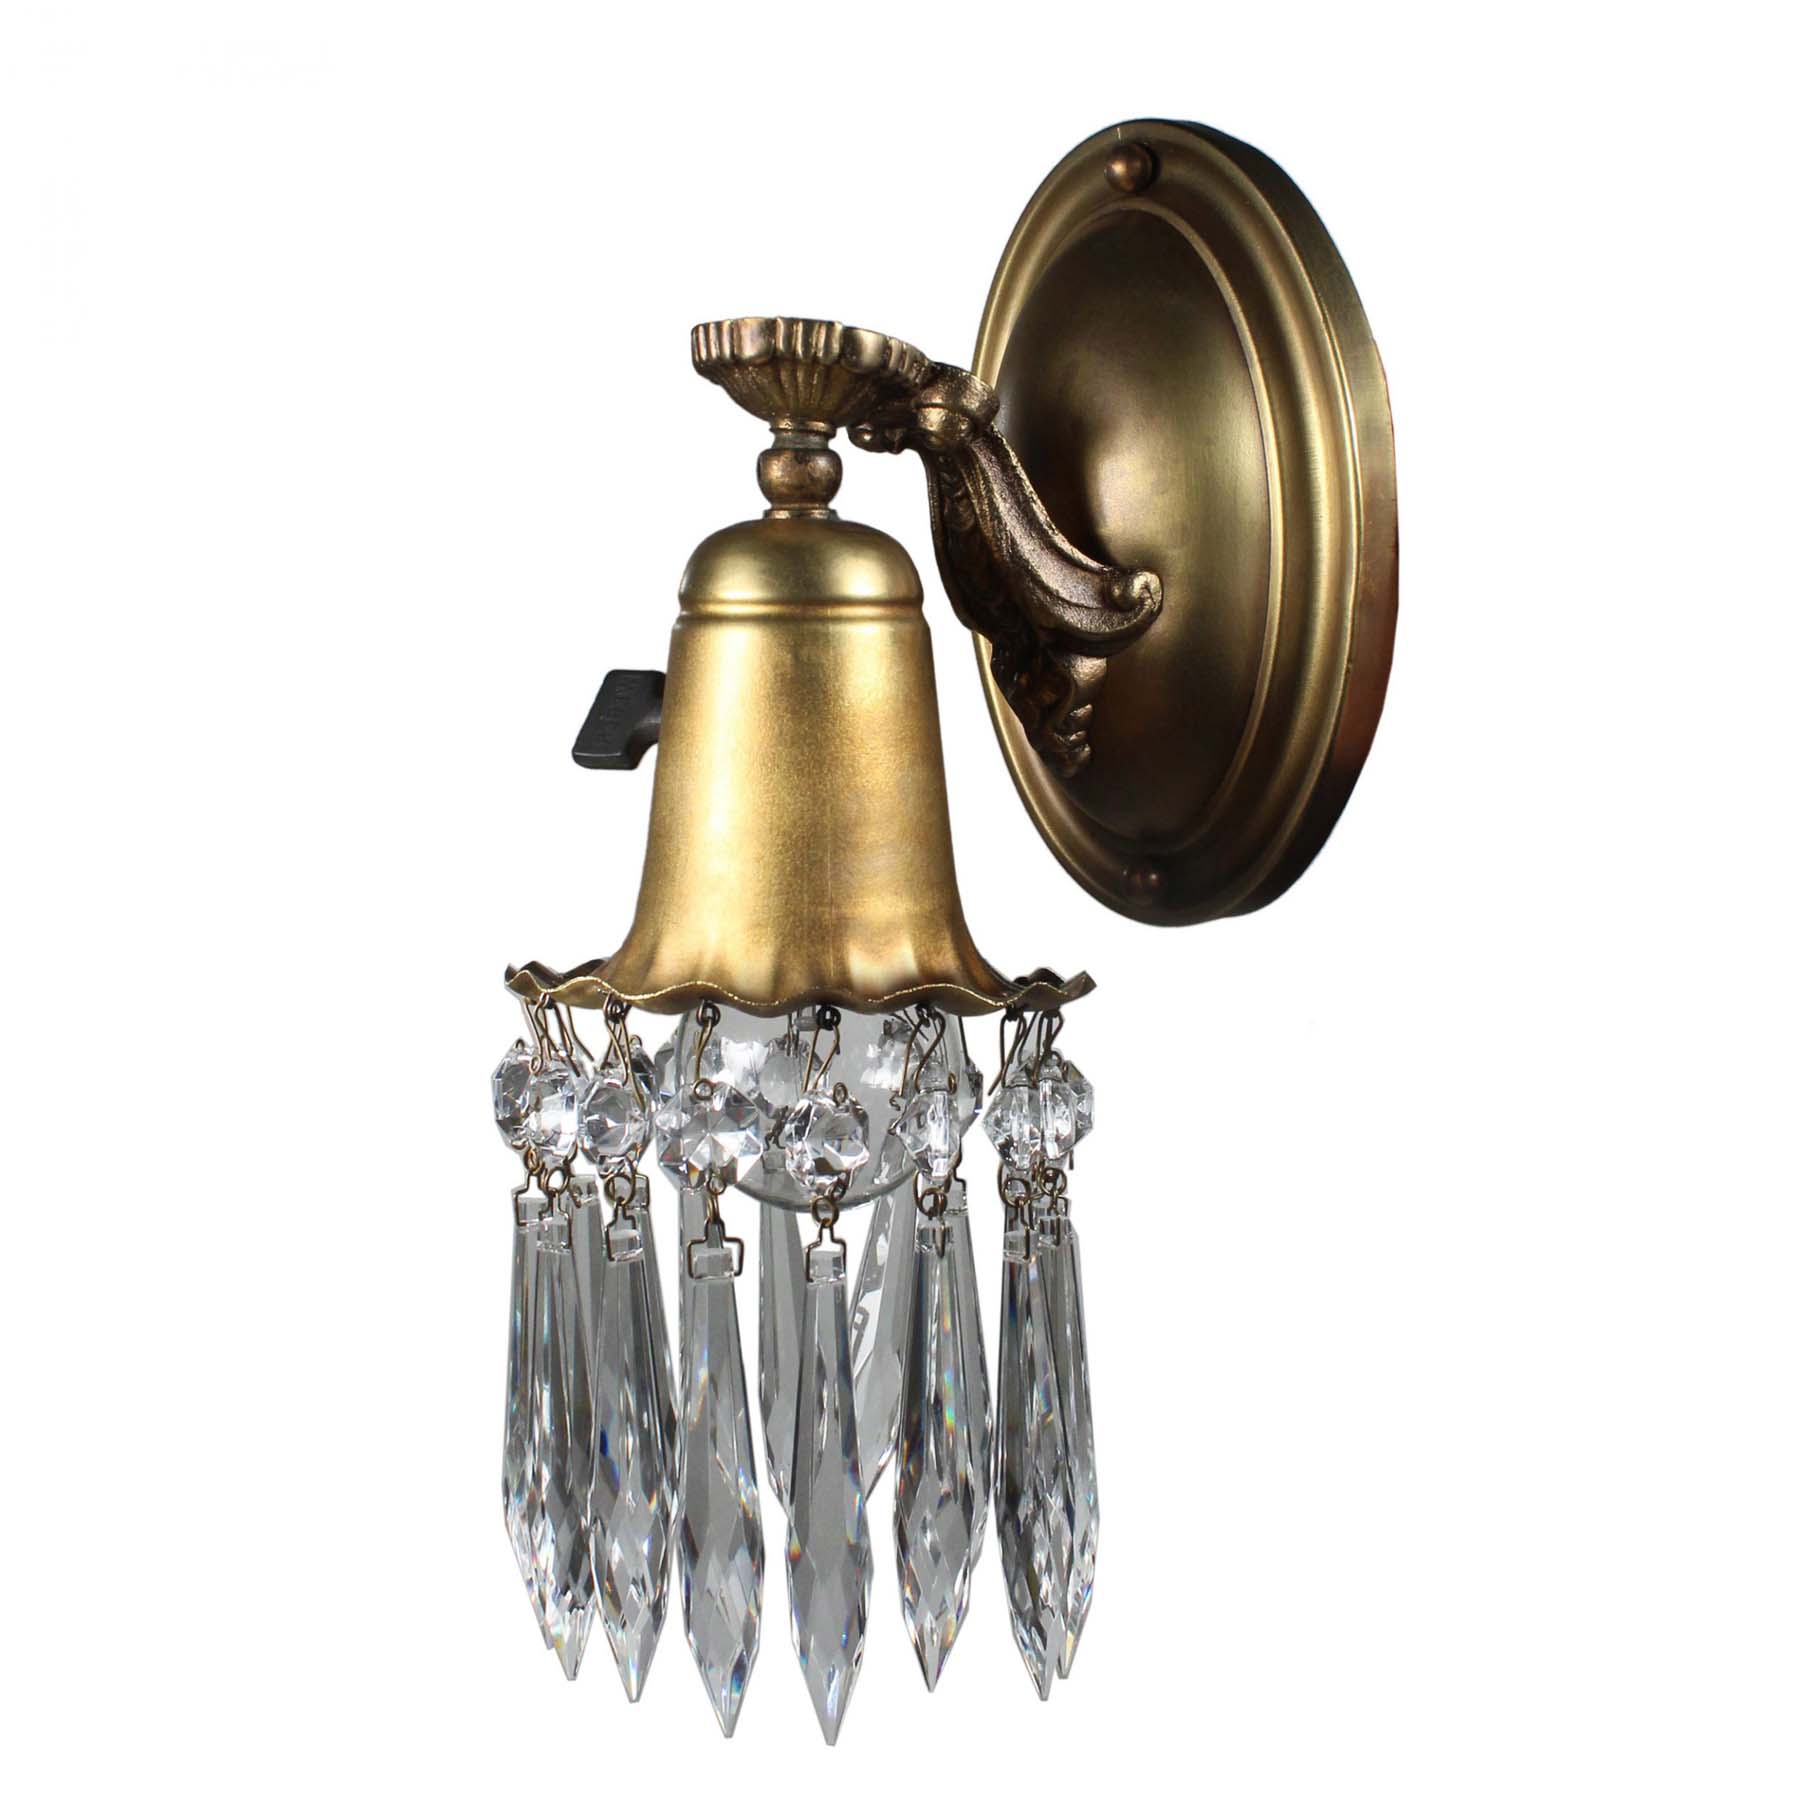 SOLD Pair of Antique Brass Sconces with Prisms-72147